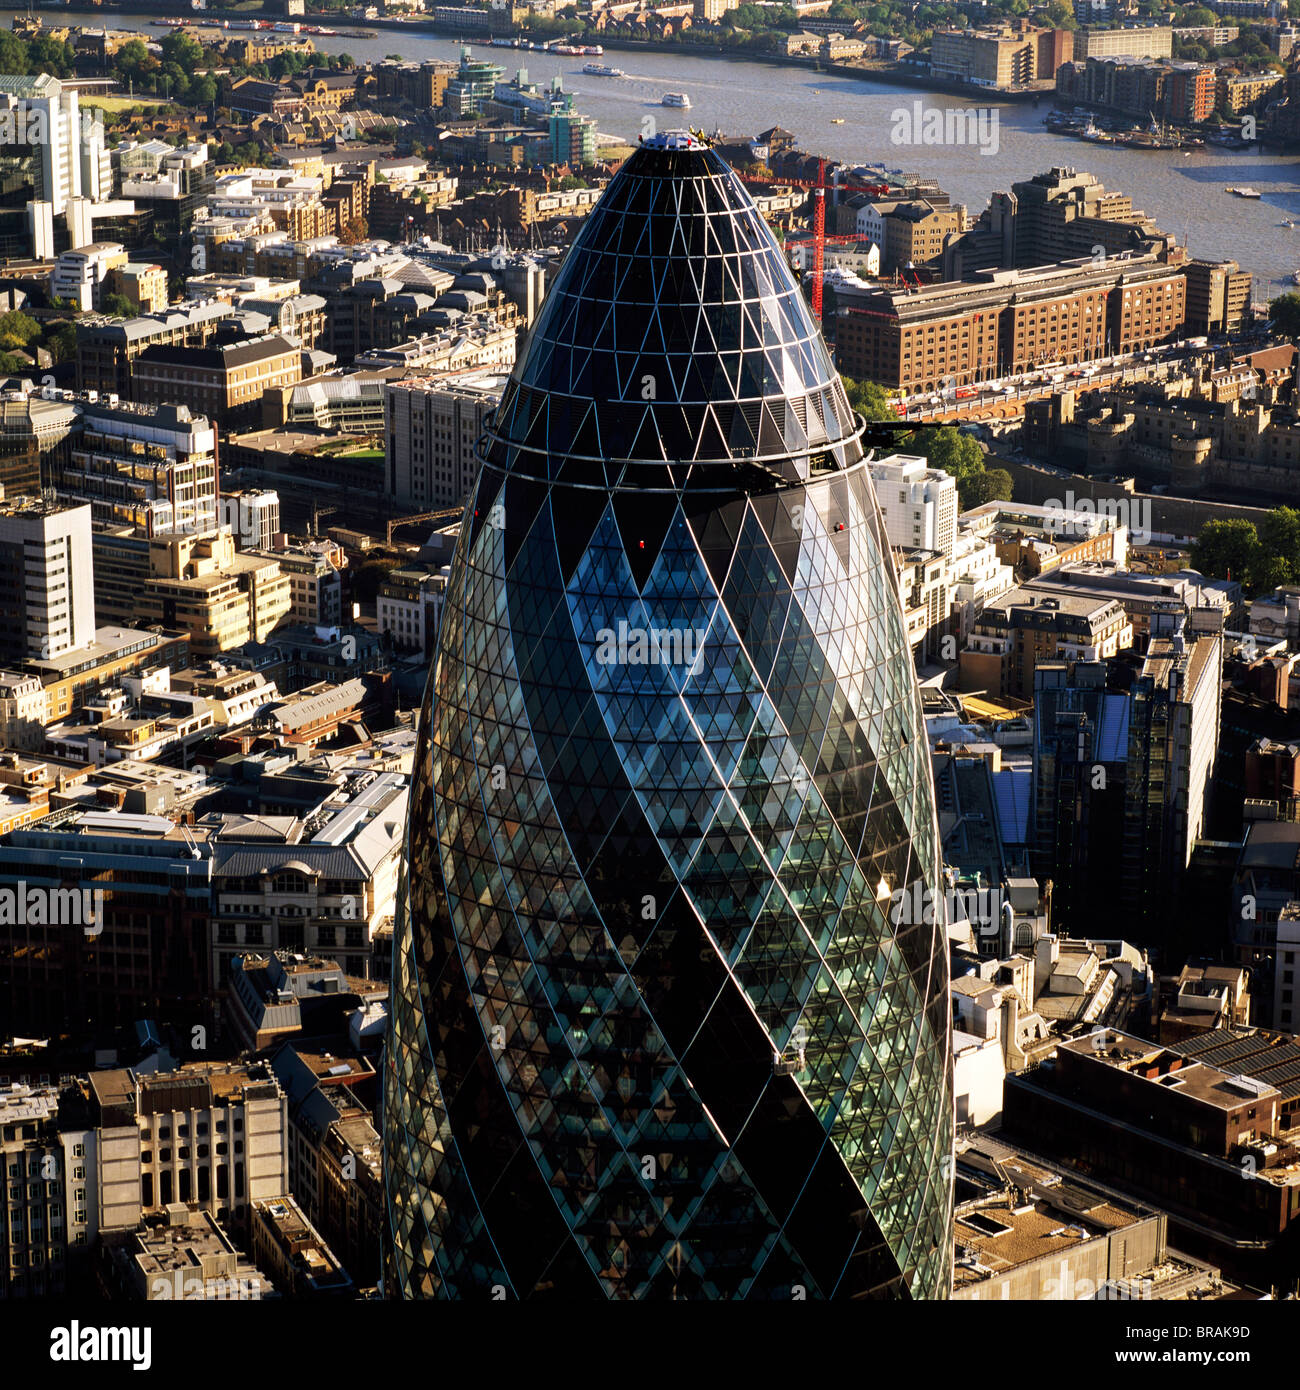 Aerial image of the Swiss Re Building (30 St. Mary Axe) (Gherkin), City of London, London, England, United Kingdom, Europe Stock Photo